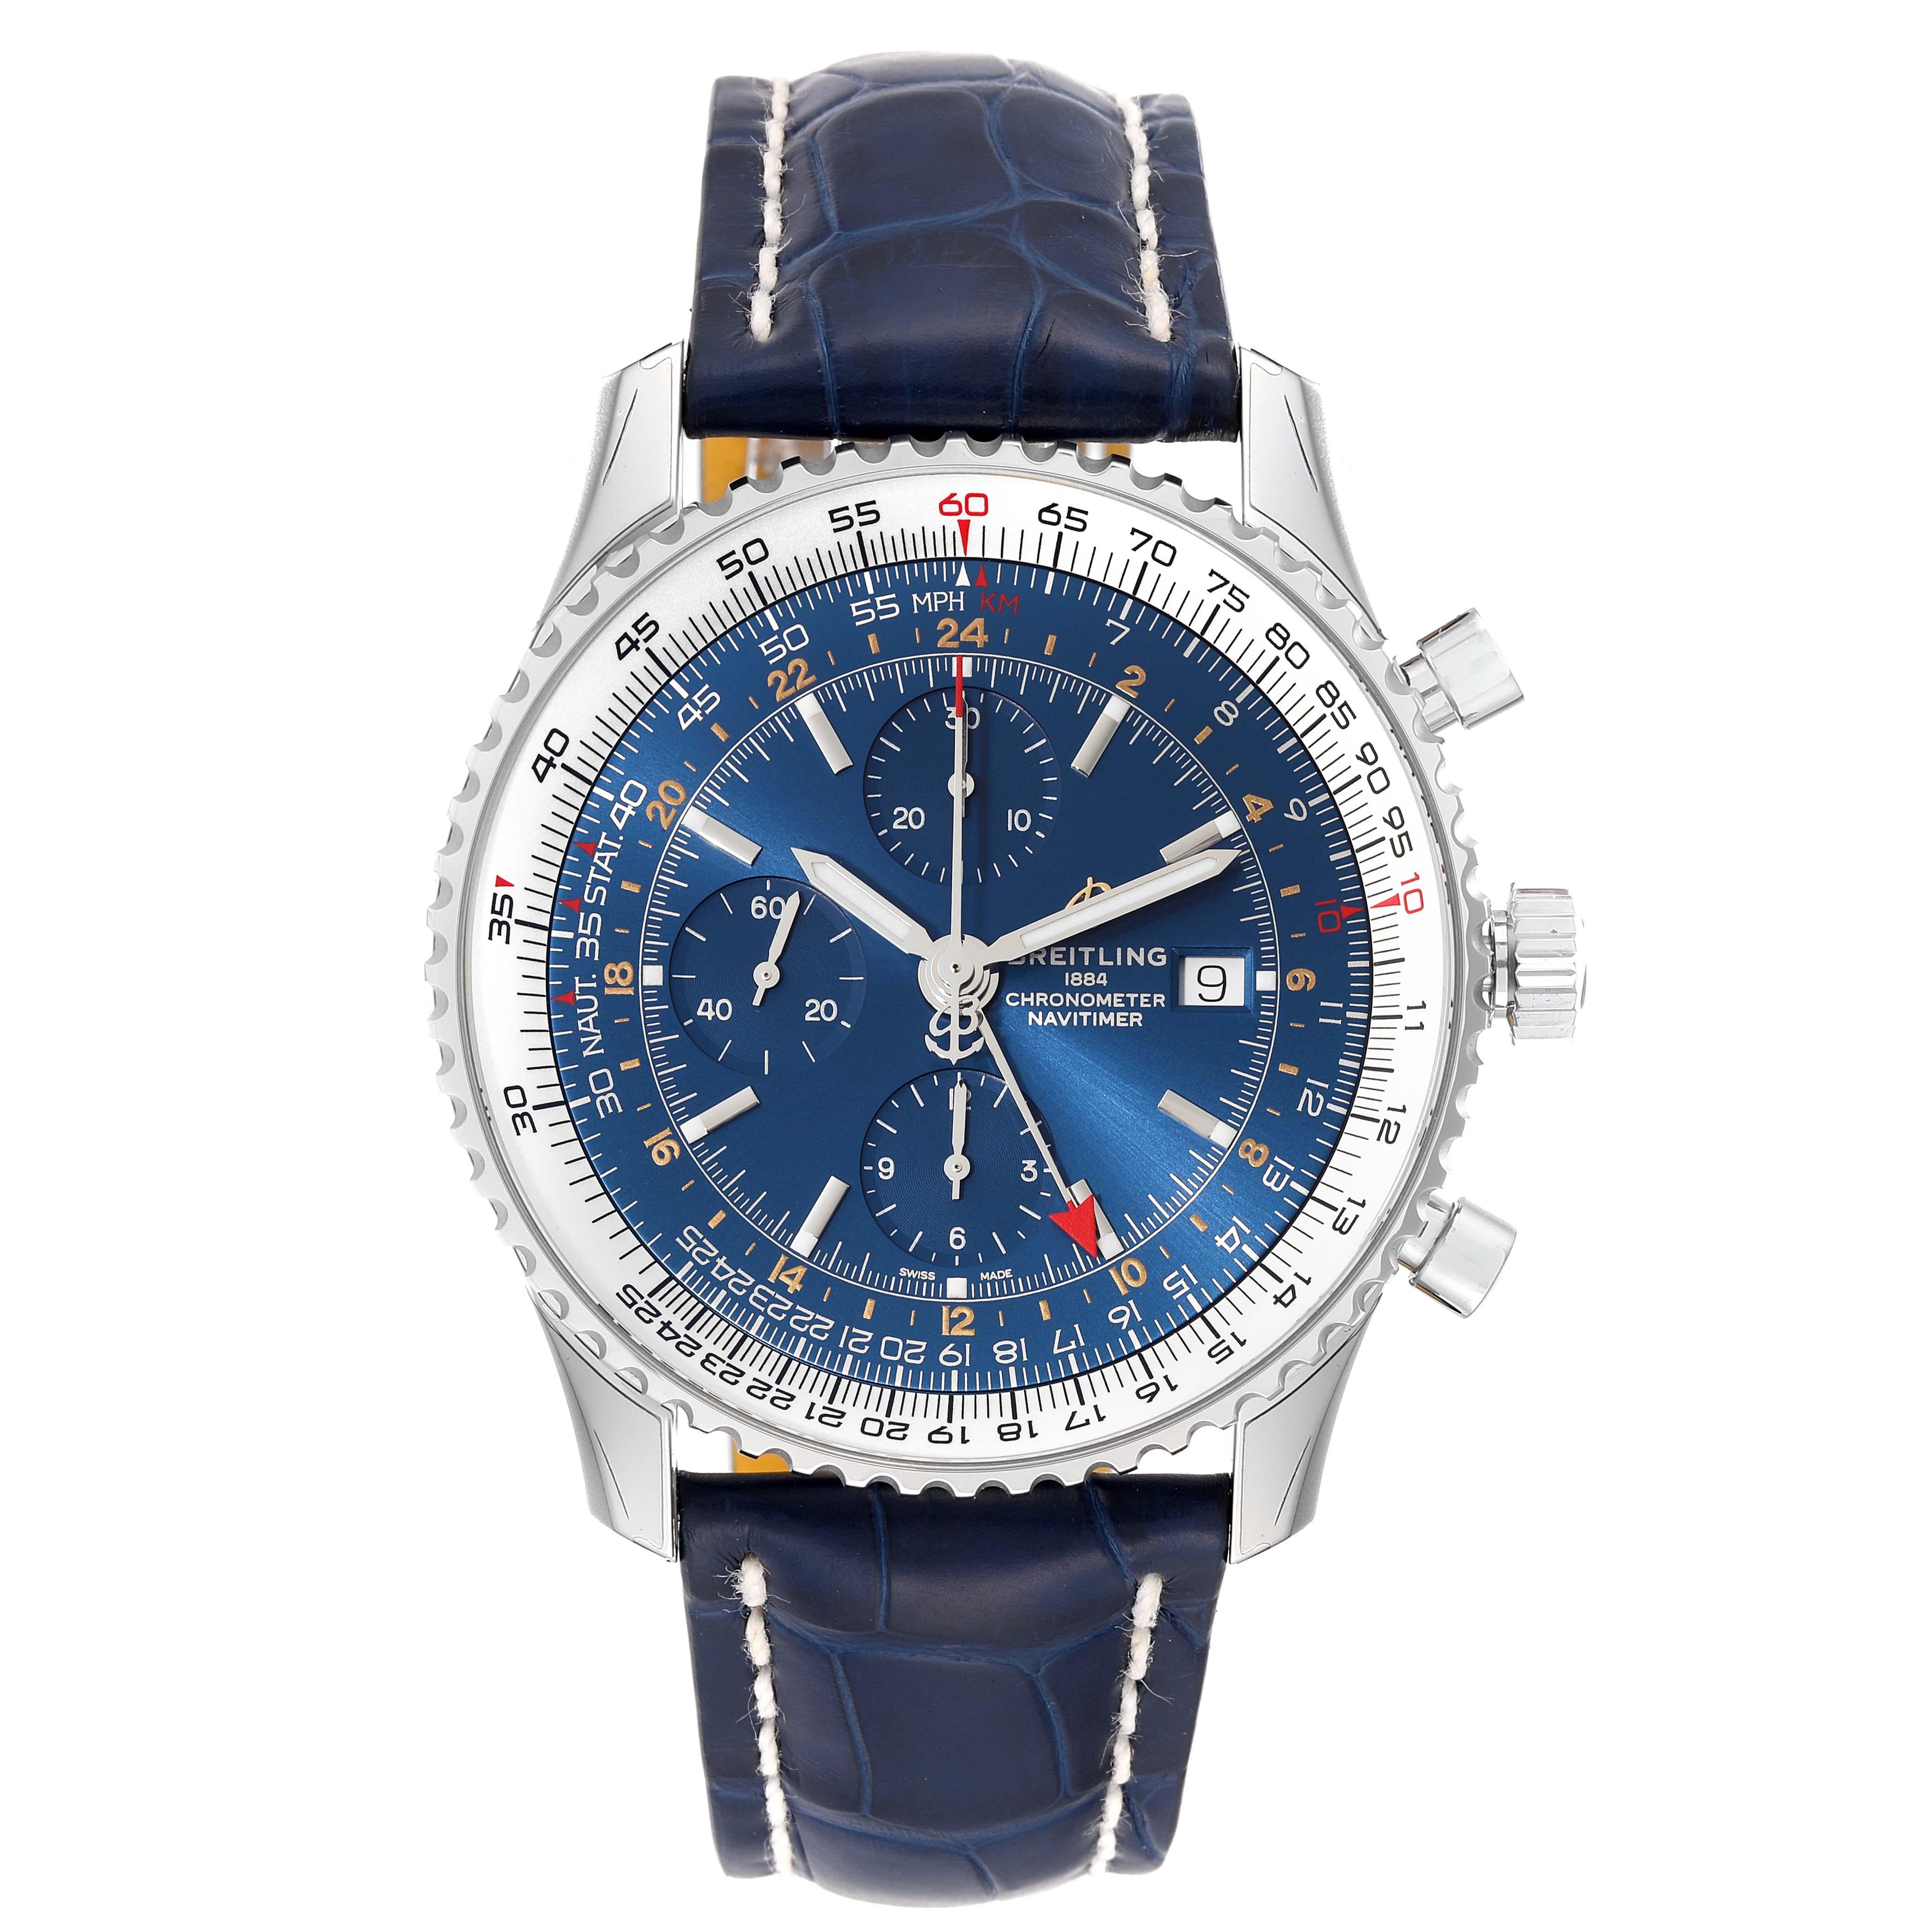 Breitling Navitimer World Blue Dial Steel Mens Watch A24322 Unworn. Self-winding automatic officially certified chronometer movement. Chronograph function. Stainless steel case 46.0 mm in diameter. Stainless steel crown and pushers. Stainless steel